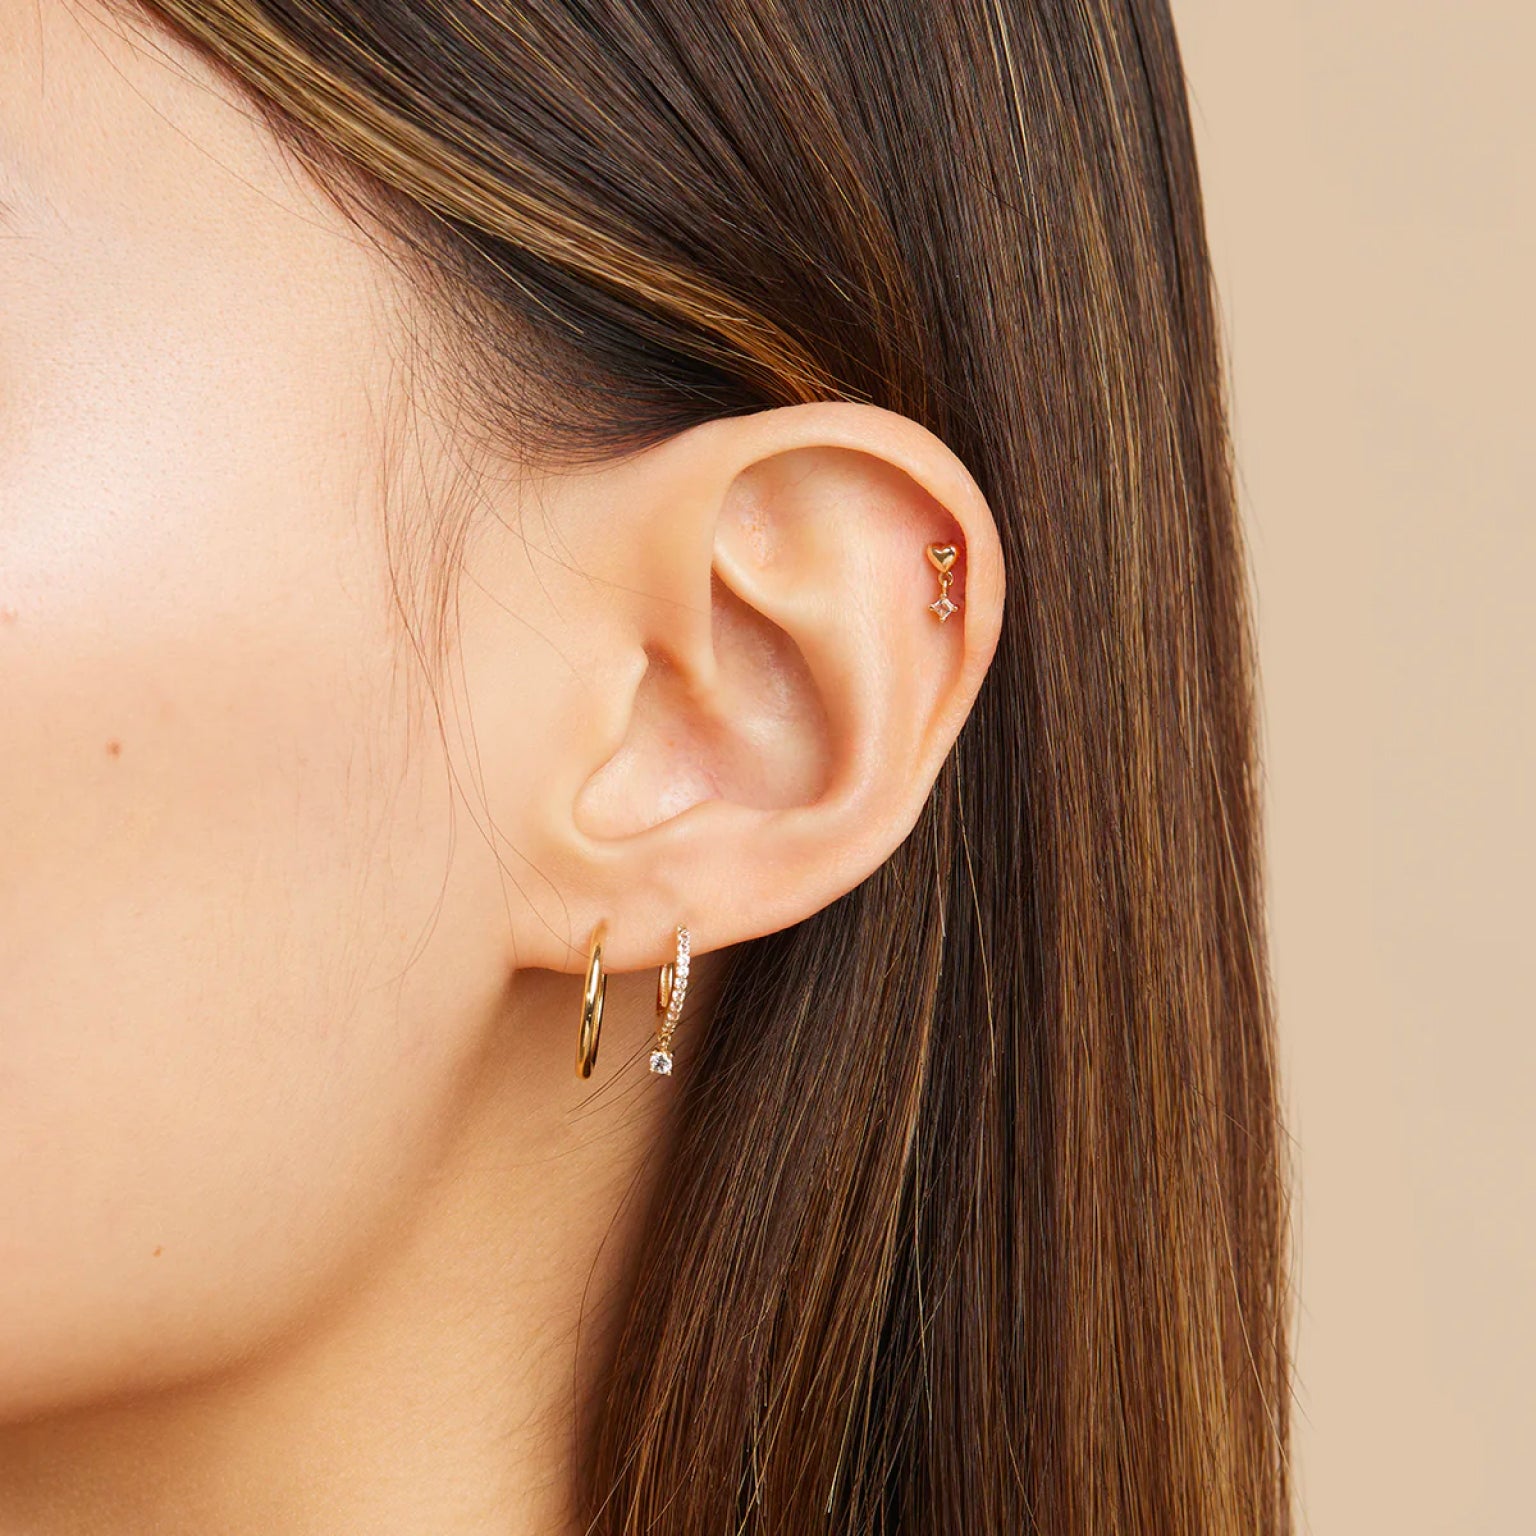 14K Solid Gold Dangle Cartilage Earring Stud/hidden Helix Piercing/conch  Piercing/curved Bar Piercing/tragus Rook Earlobe Studs/gift for Her - Etsy